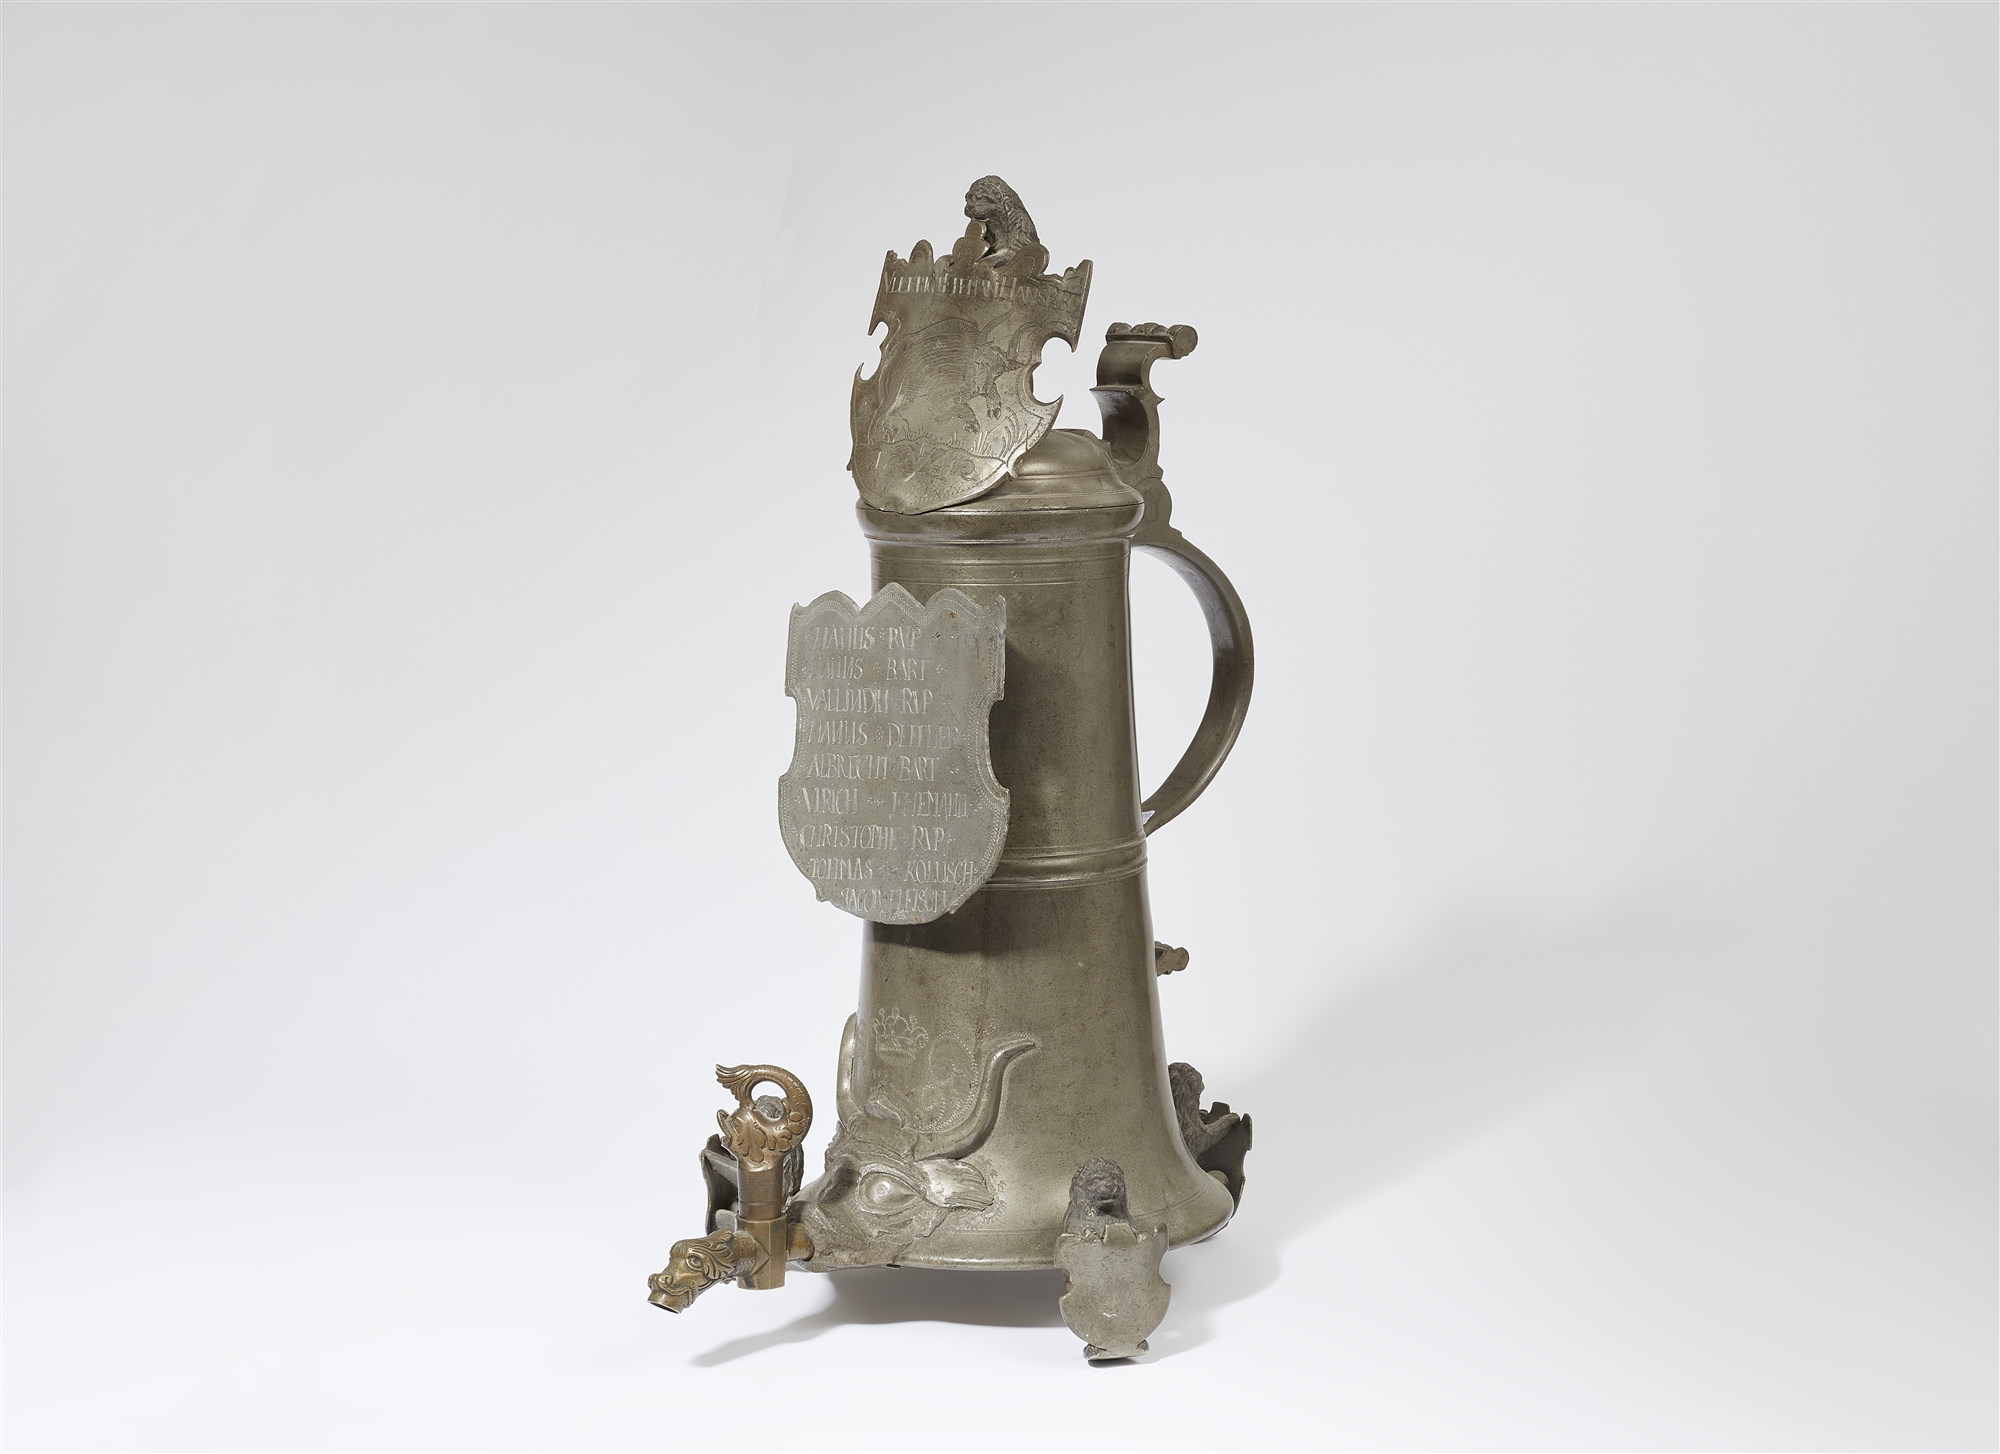 A pewter jug made for the Nuremberg butchers' guild